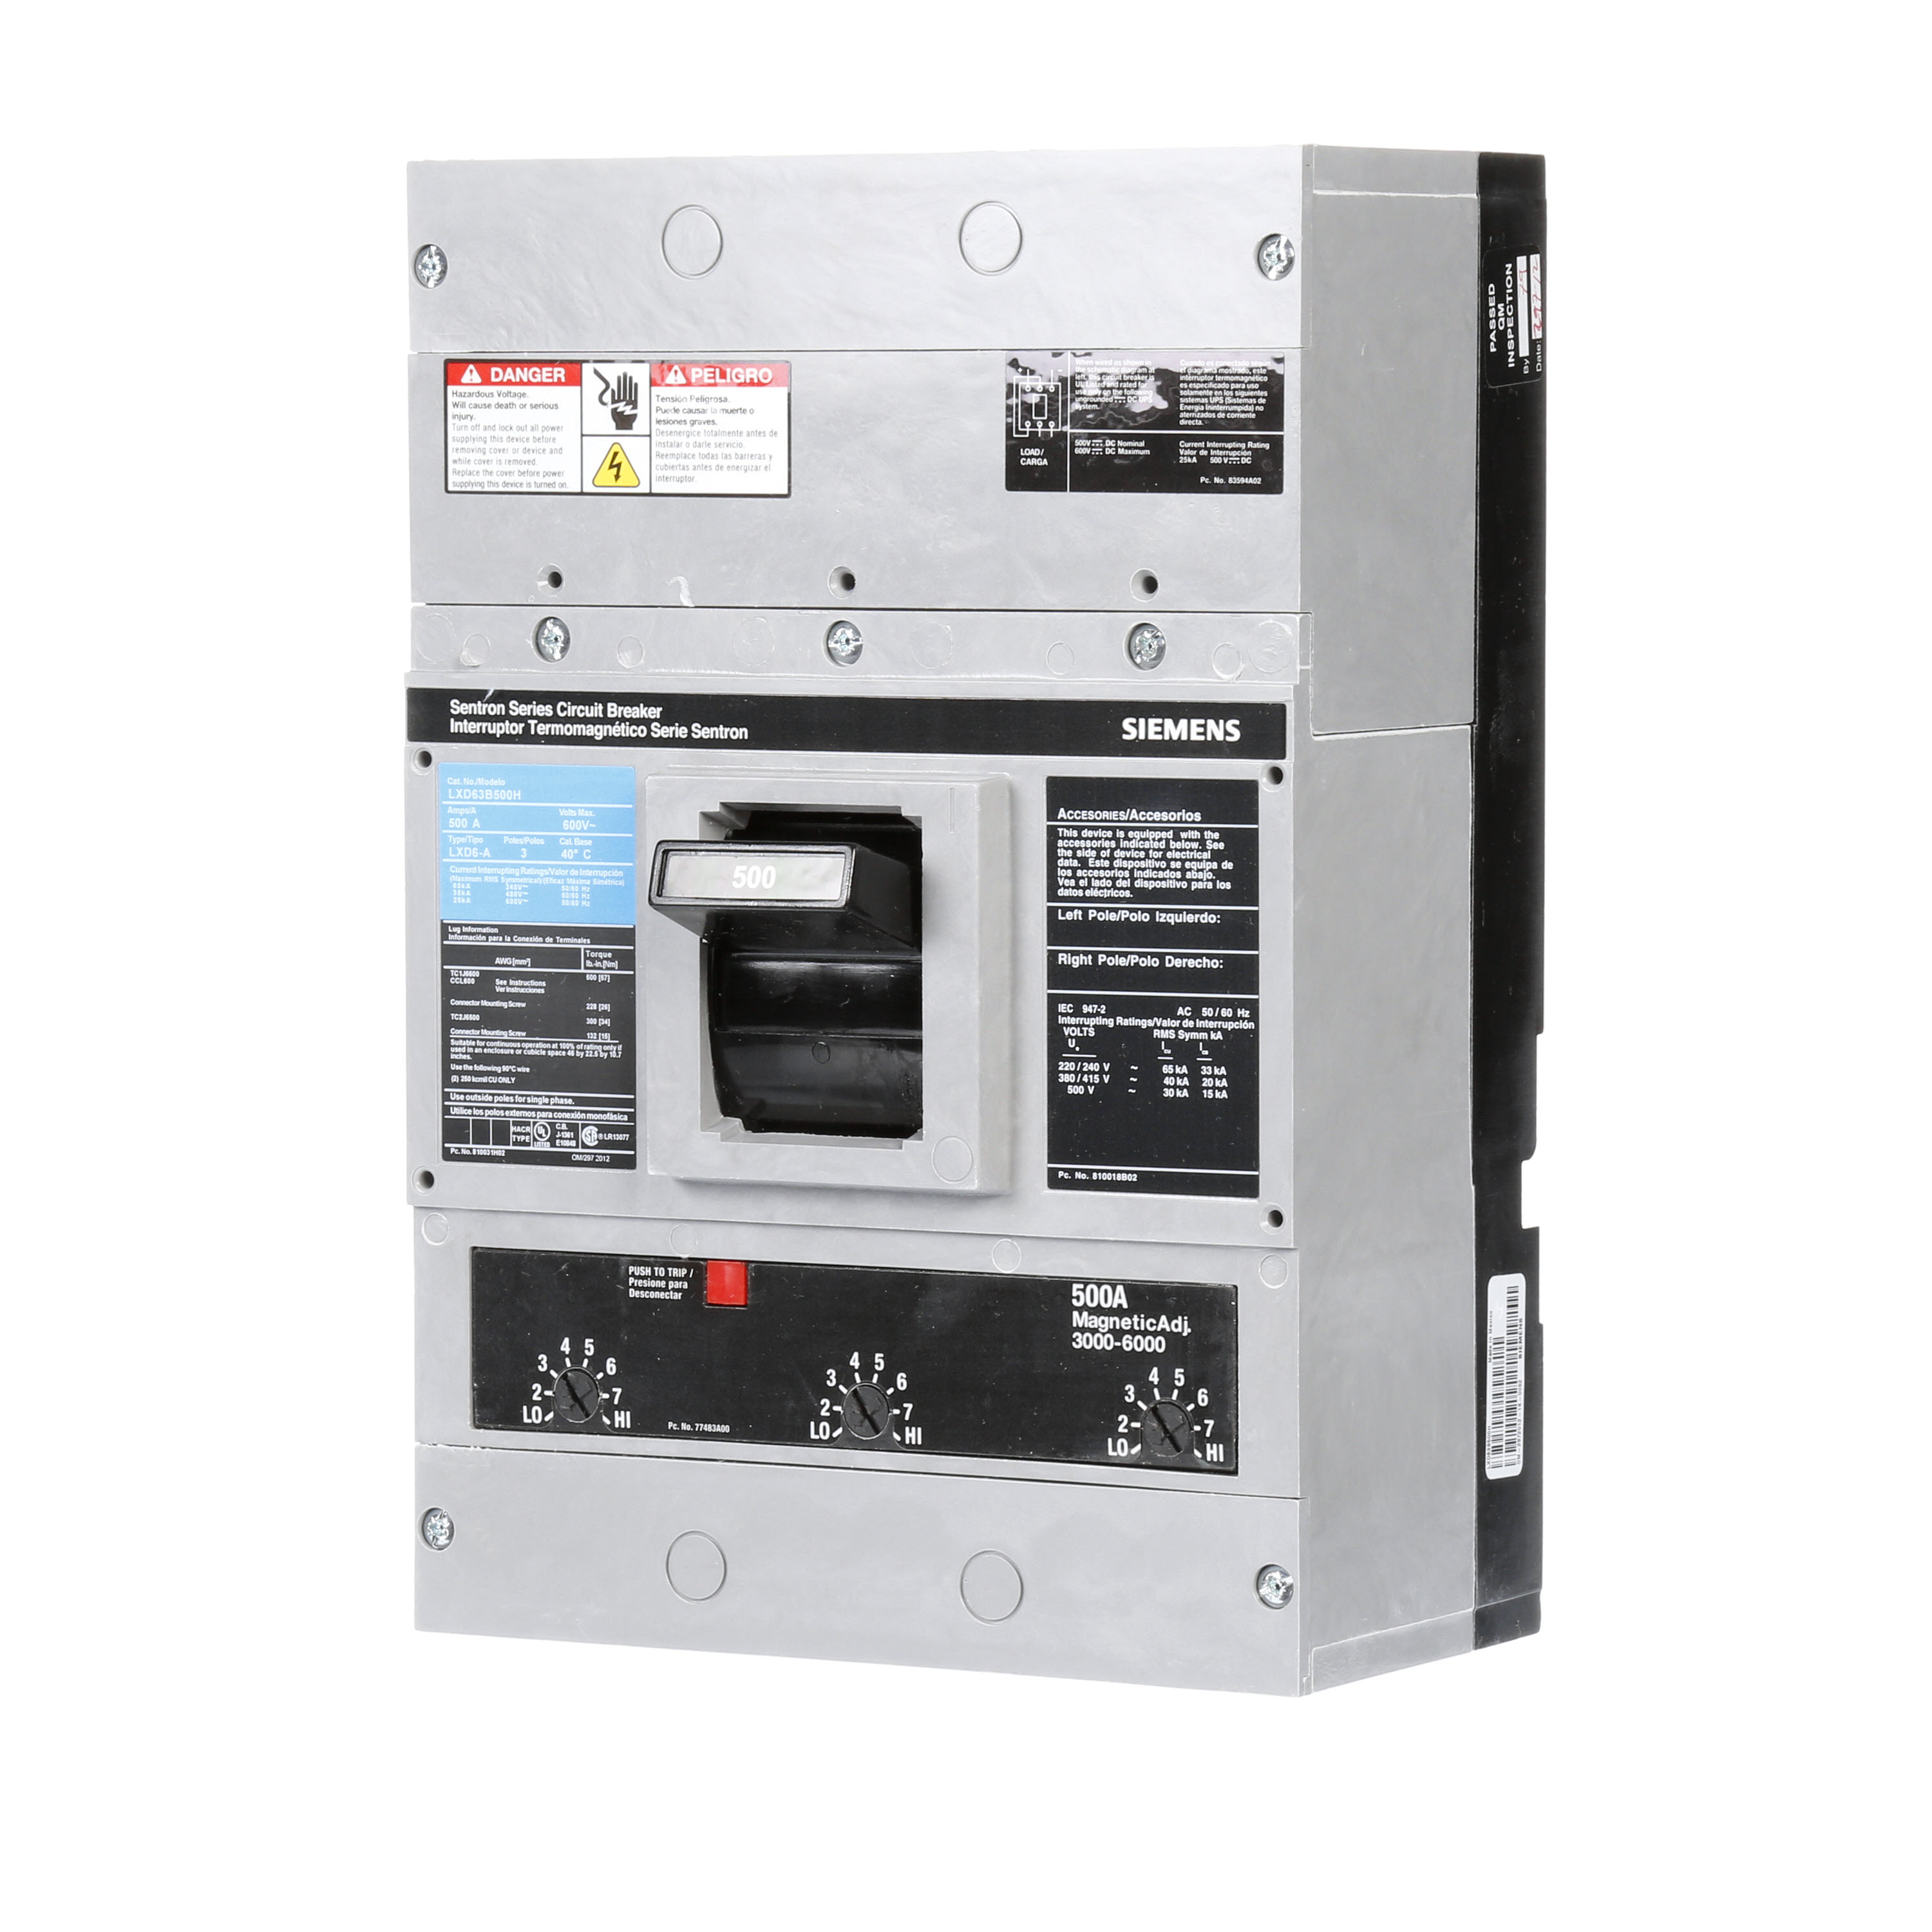 SIEMENS LOW VOLTAGE SENTRON MOLDED CASE CIRCUIT BREAKER WITH THERMAL - MAGNETICTRIP UNIT. ASSEMBLED 100 PERCENT RATED STANDARD 40 DEG C BREAKER LD FRAME WITH STANDARD BREAKING CAPACITY. 500A 3-POLE (25KAIC AT 600V) (35KAIC AT 480V). NON-INTERCHANGEABLE TRIP UNIT. SPECIAL FEATURES NO LUGS INSTALLED. DIMENSIONS (W x H x D) IN 7.50 x 11.0 x 4.00.